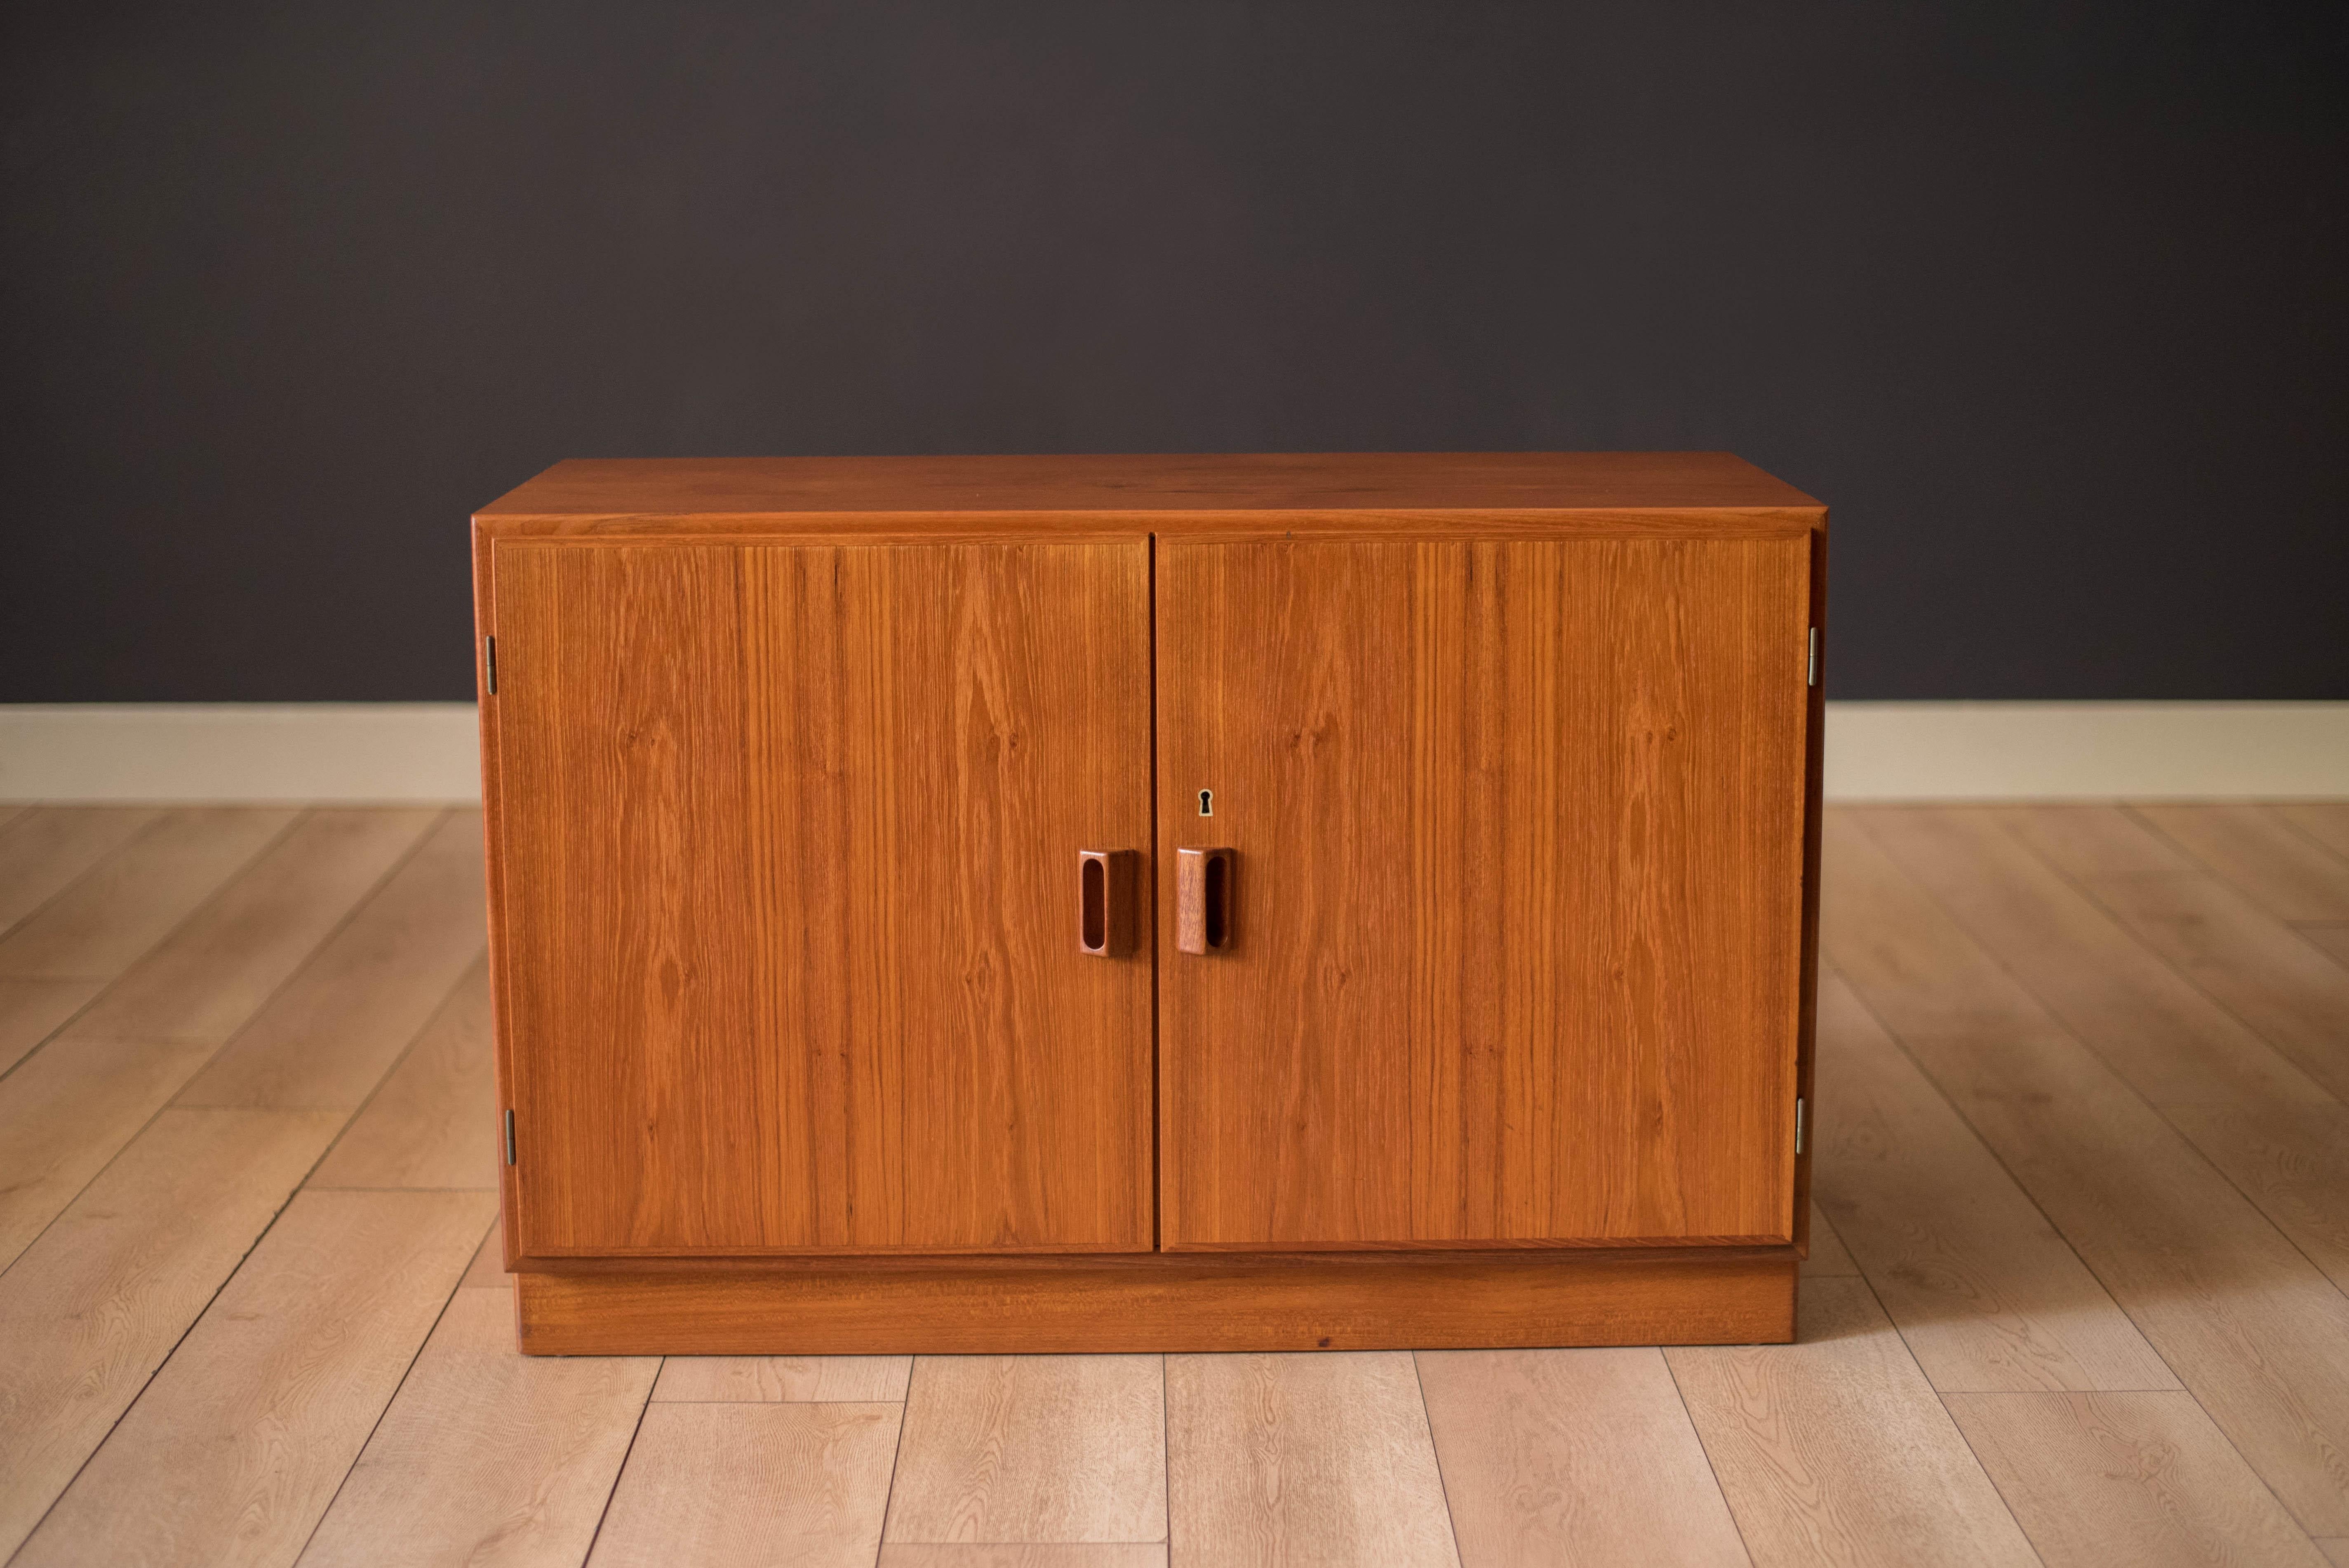 Mid-Century Modern buffet sideboard cabinet in teak designed by Borge Mogensen circa 1960's. This unique piece is accented with signature sculpted handles and brass hardware providing outswing doors and open storage space. Includes one adjustable